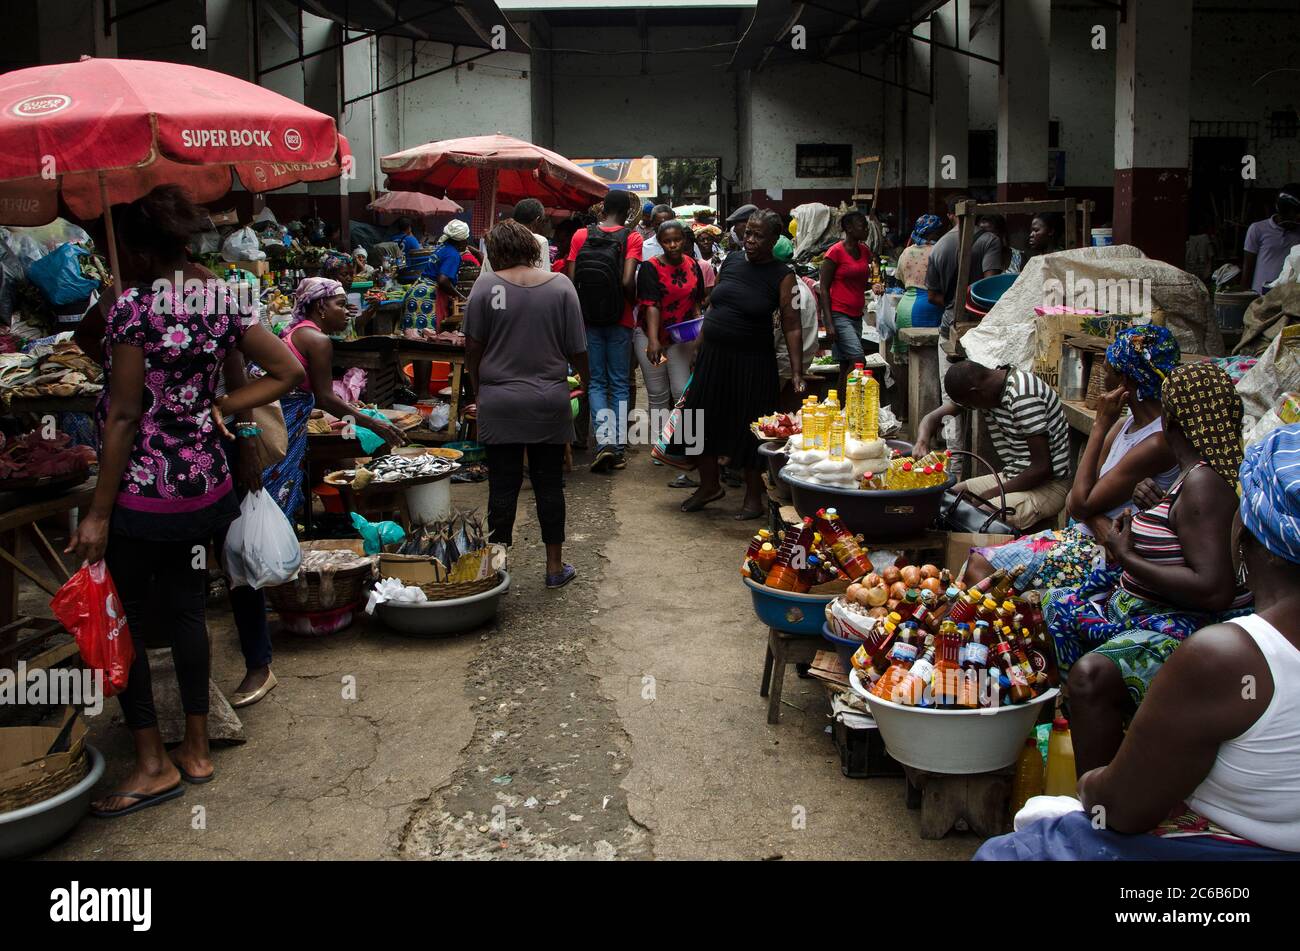 Municipal market in the city of Sao Tome, Sao Tome and Principe, Africa Stock Photo